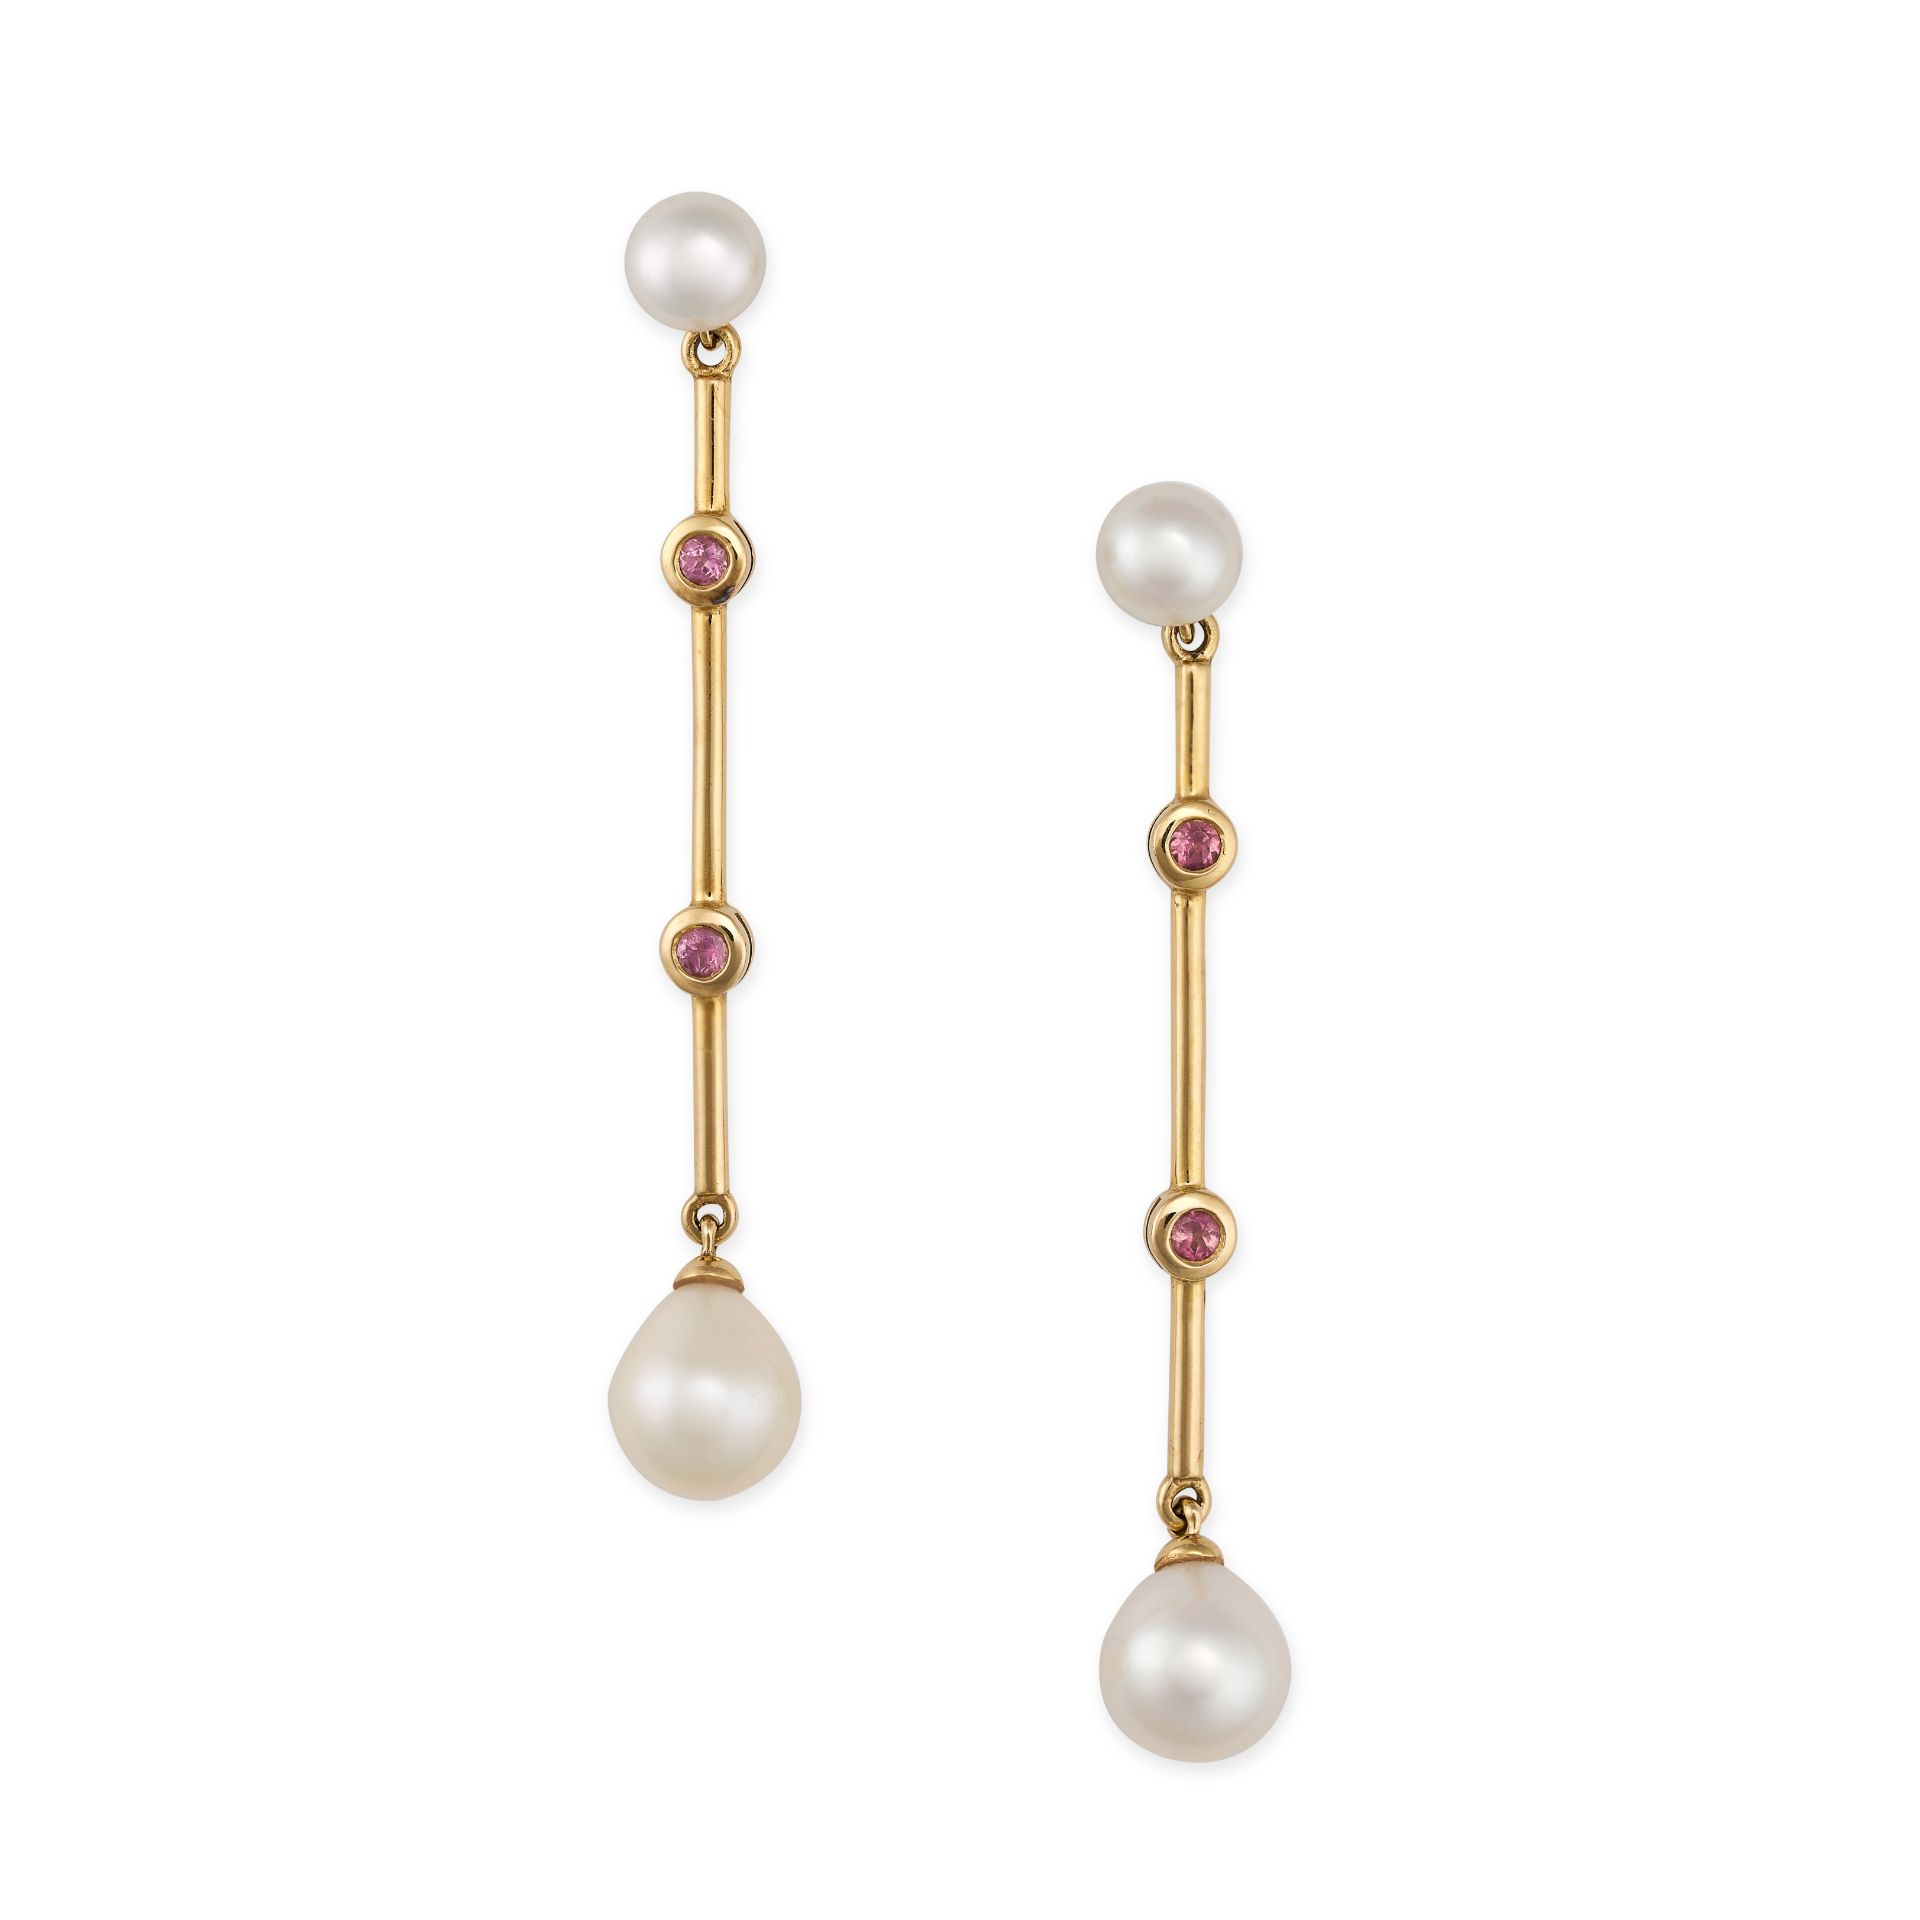 LINKS OF LONDON, A PAIR OF PEARL AND PINK TOURMALINE DROP EARRINGS in 18ct yellow gold, each comp...